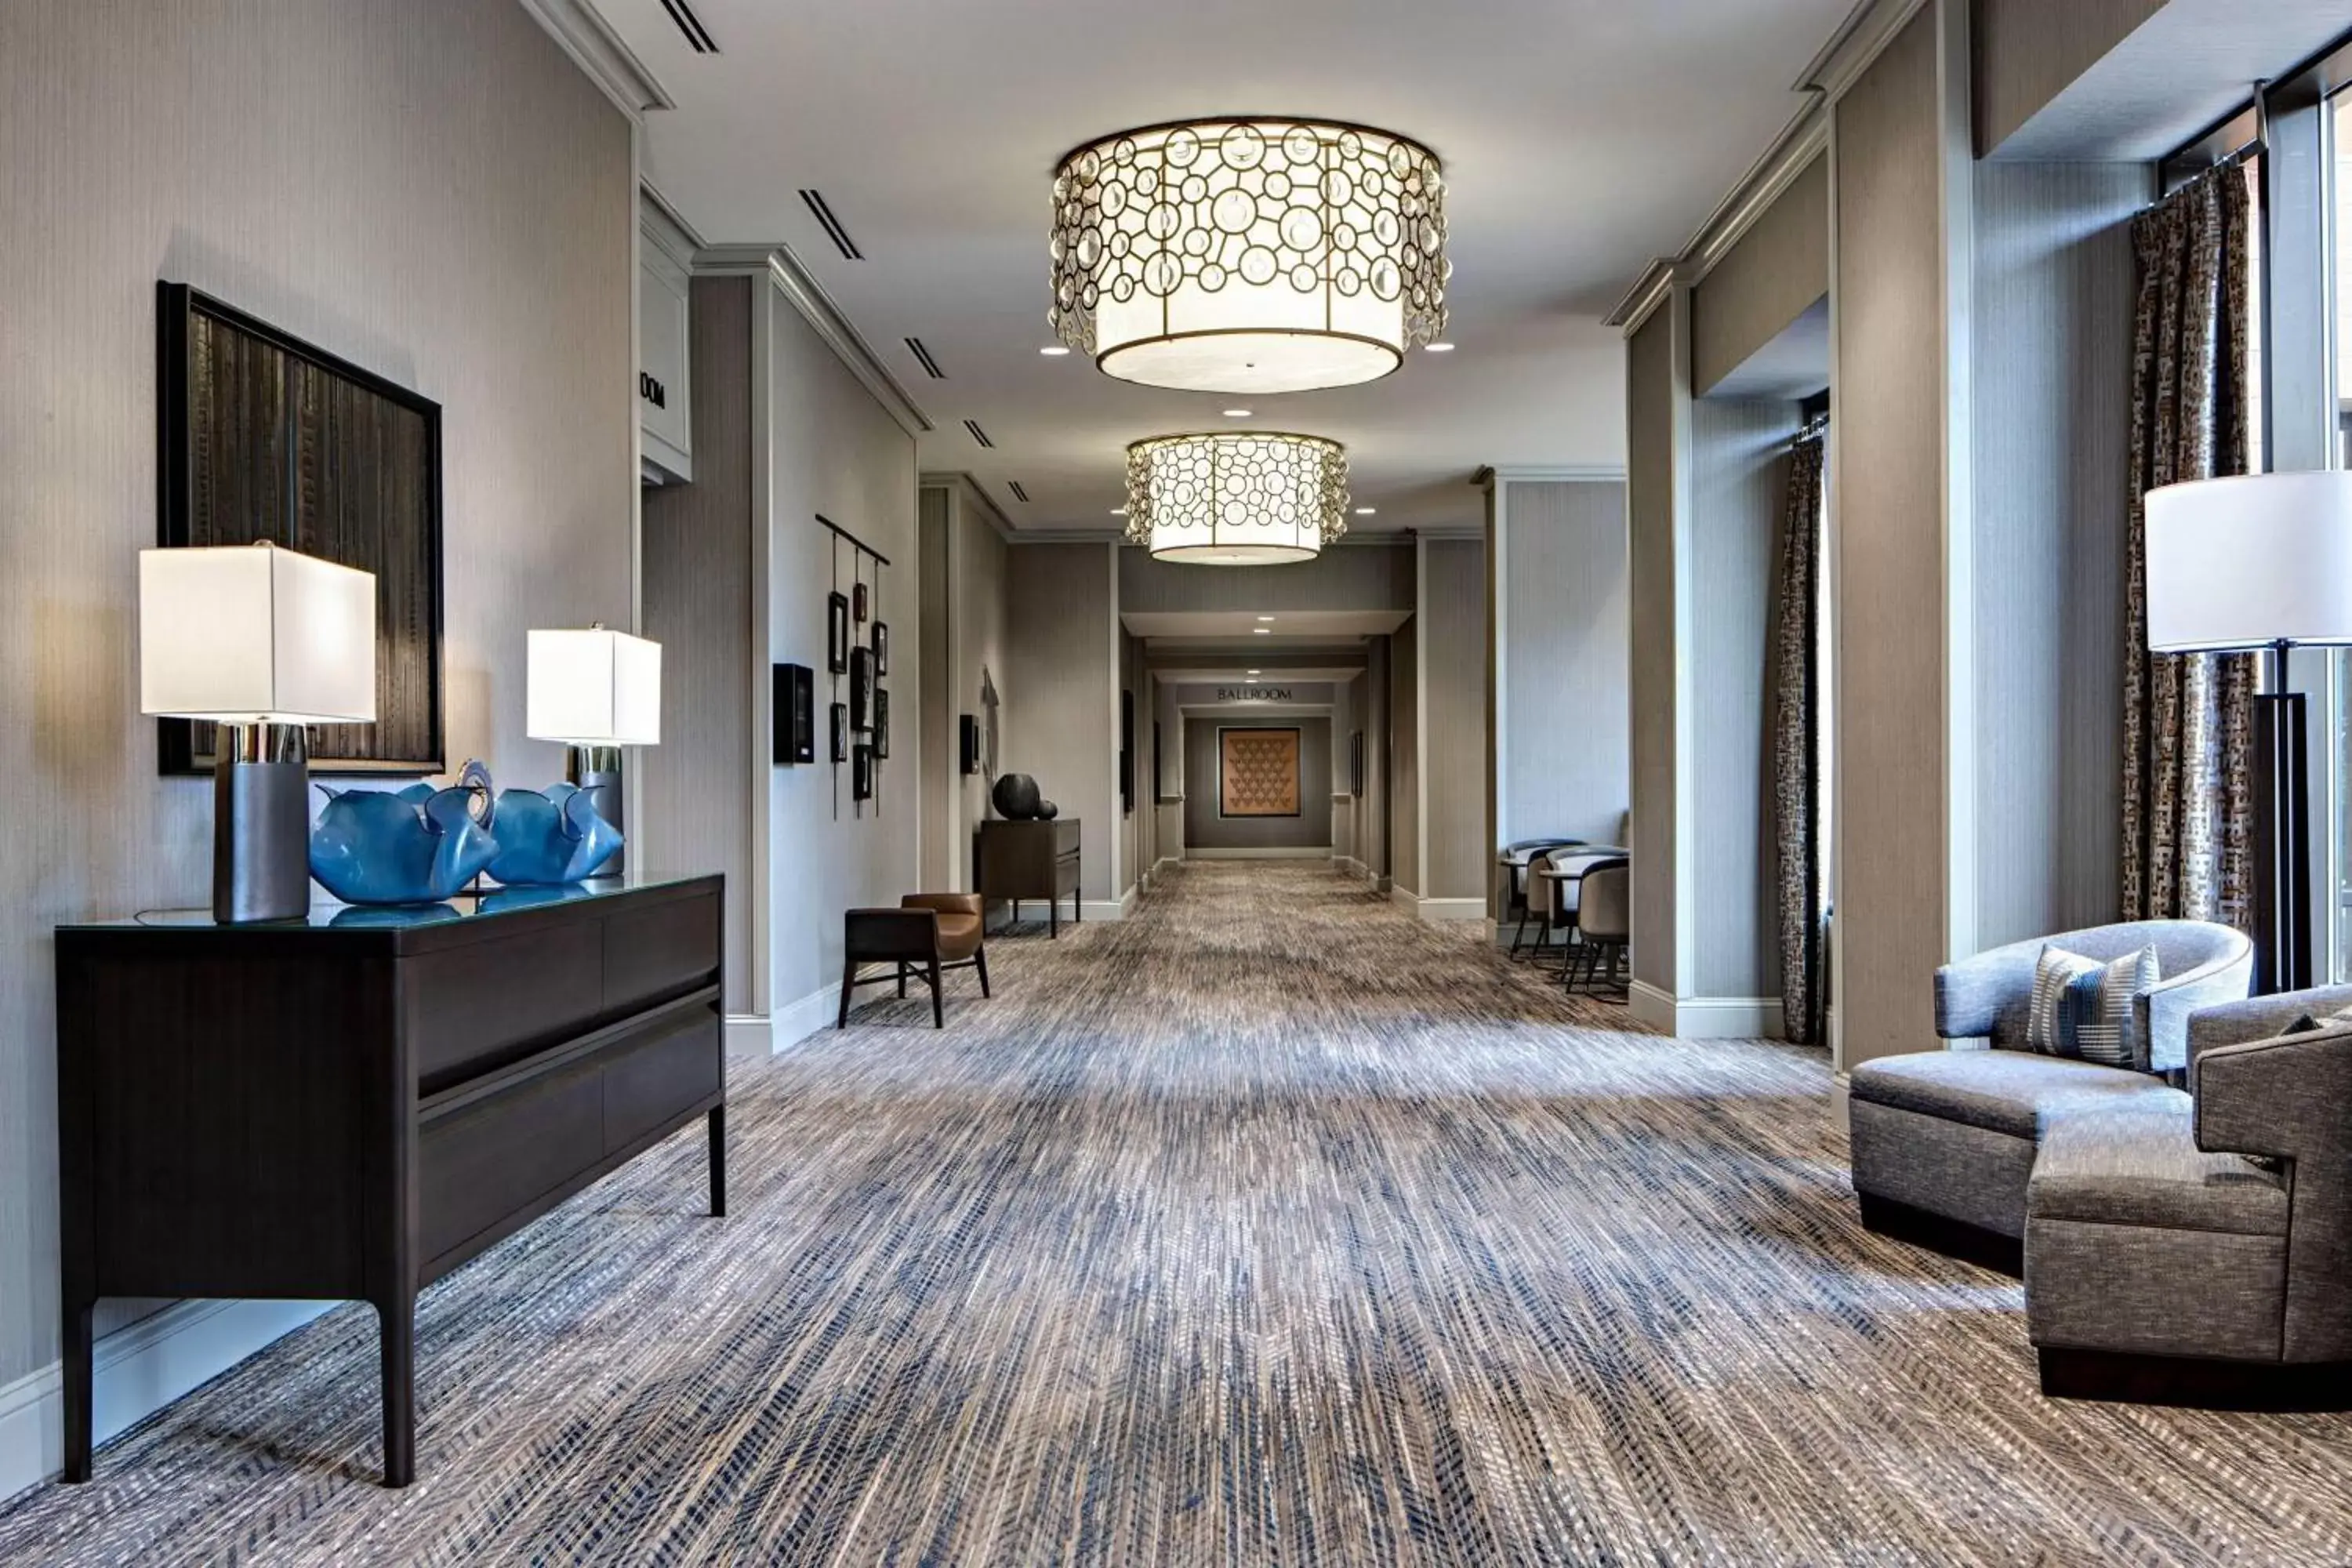 Meeting/conference room, Lobby/Reception in JW Marriott Houston by the Galleria